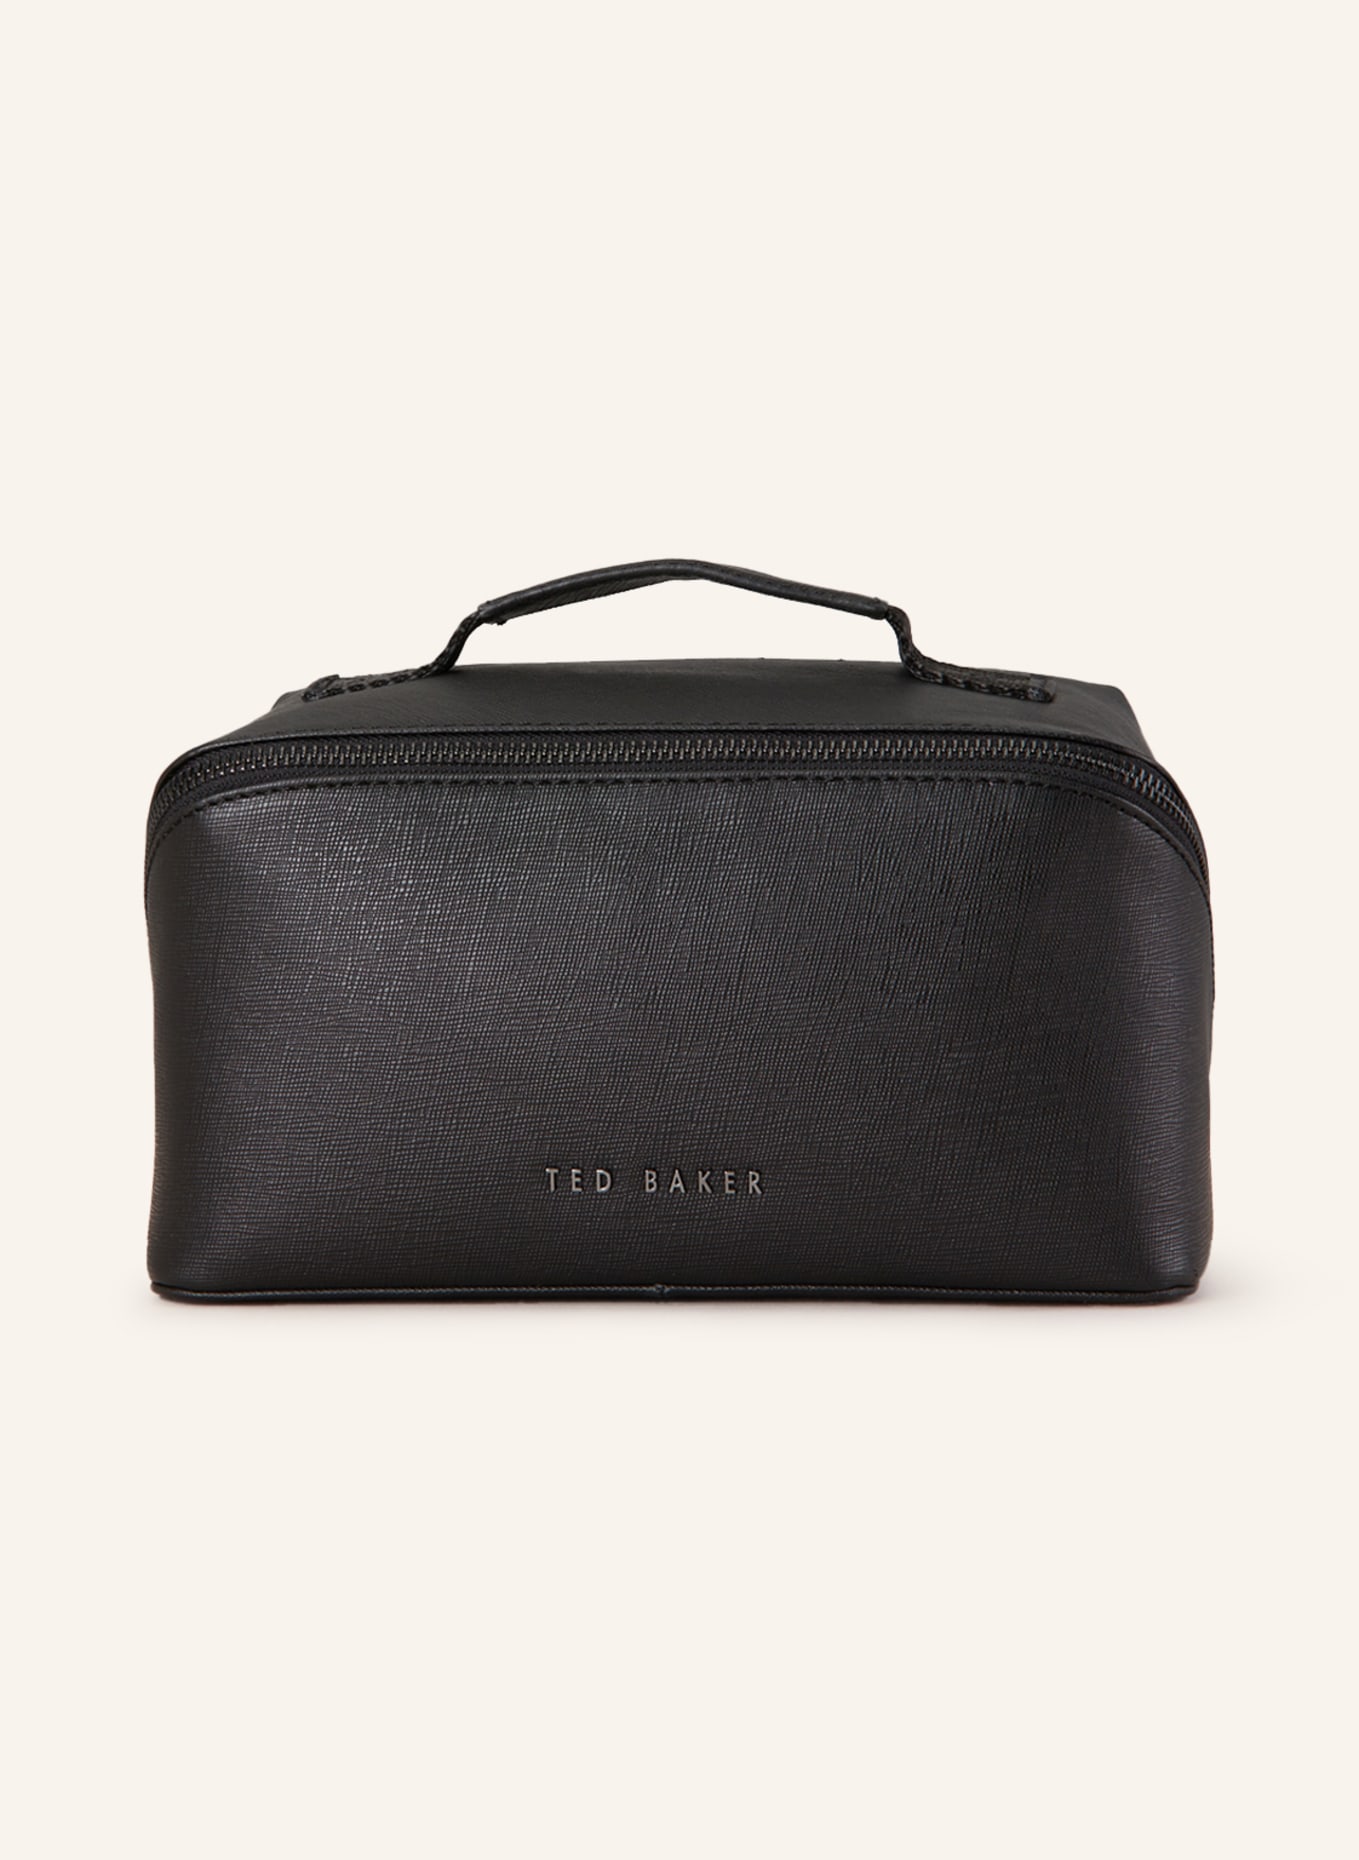 TED BAKER Saffiano toiletry bag HANSS, Color: BLACK (Image 1)